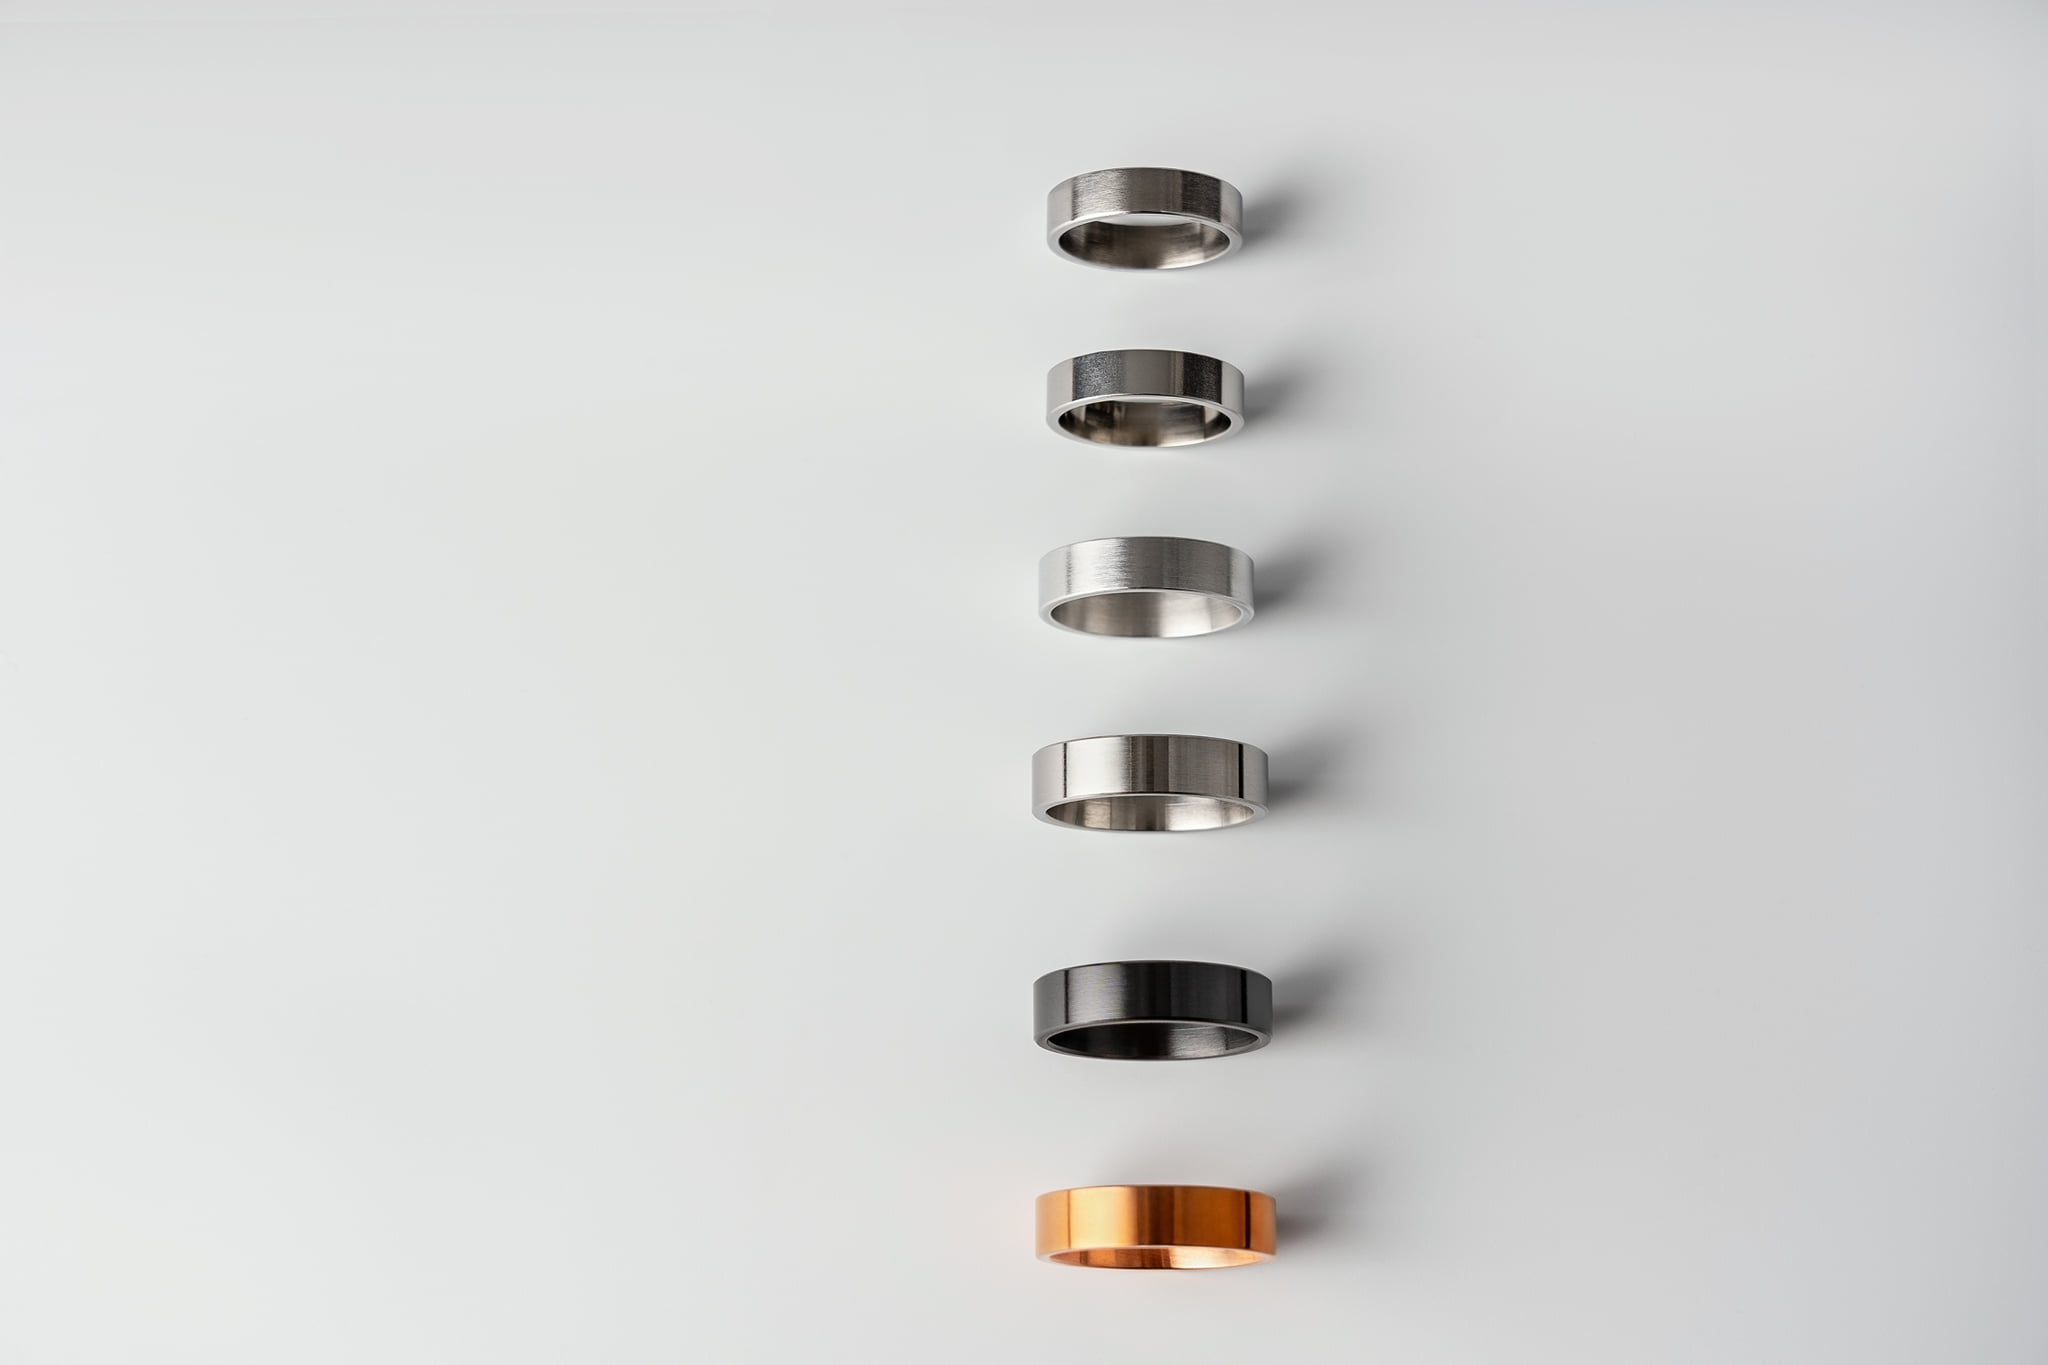 Squaremade is a Canadian company that specializes in high-quality metal rings